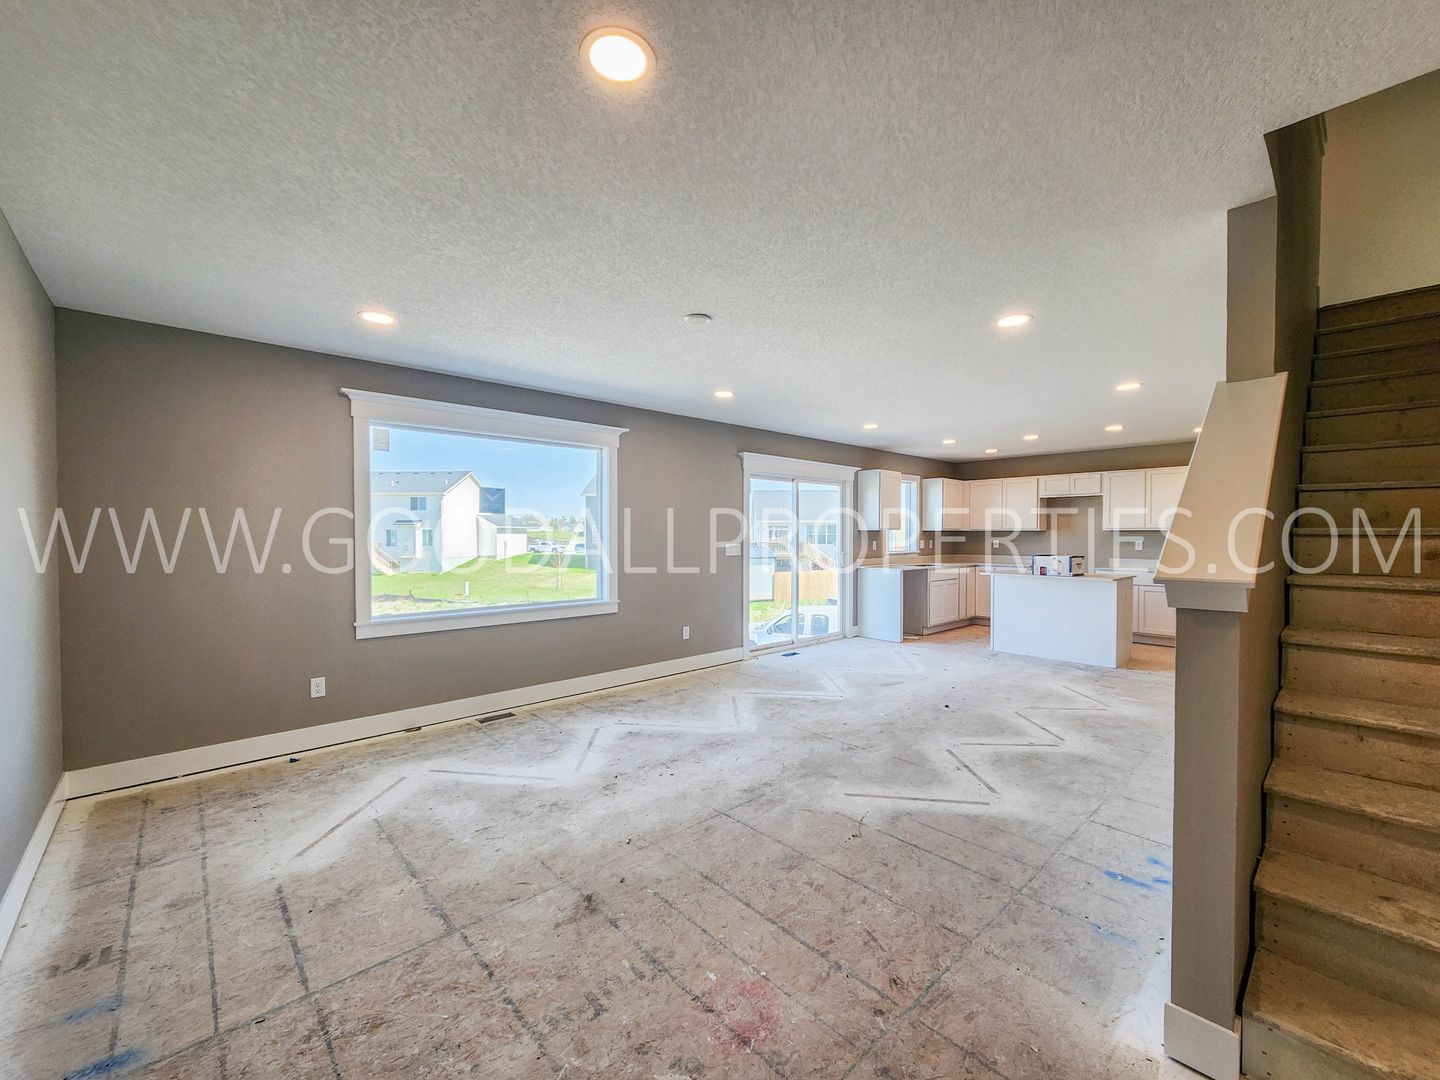 New 5 Bedroom home with a finished basement in Waukee